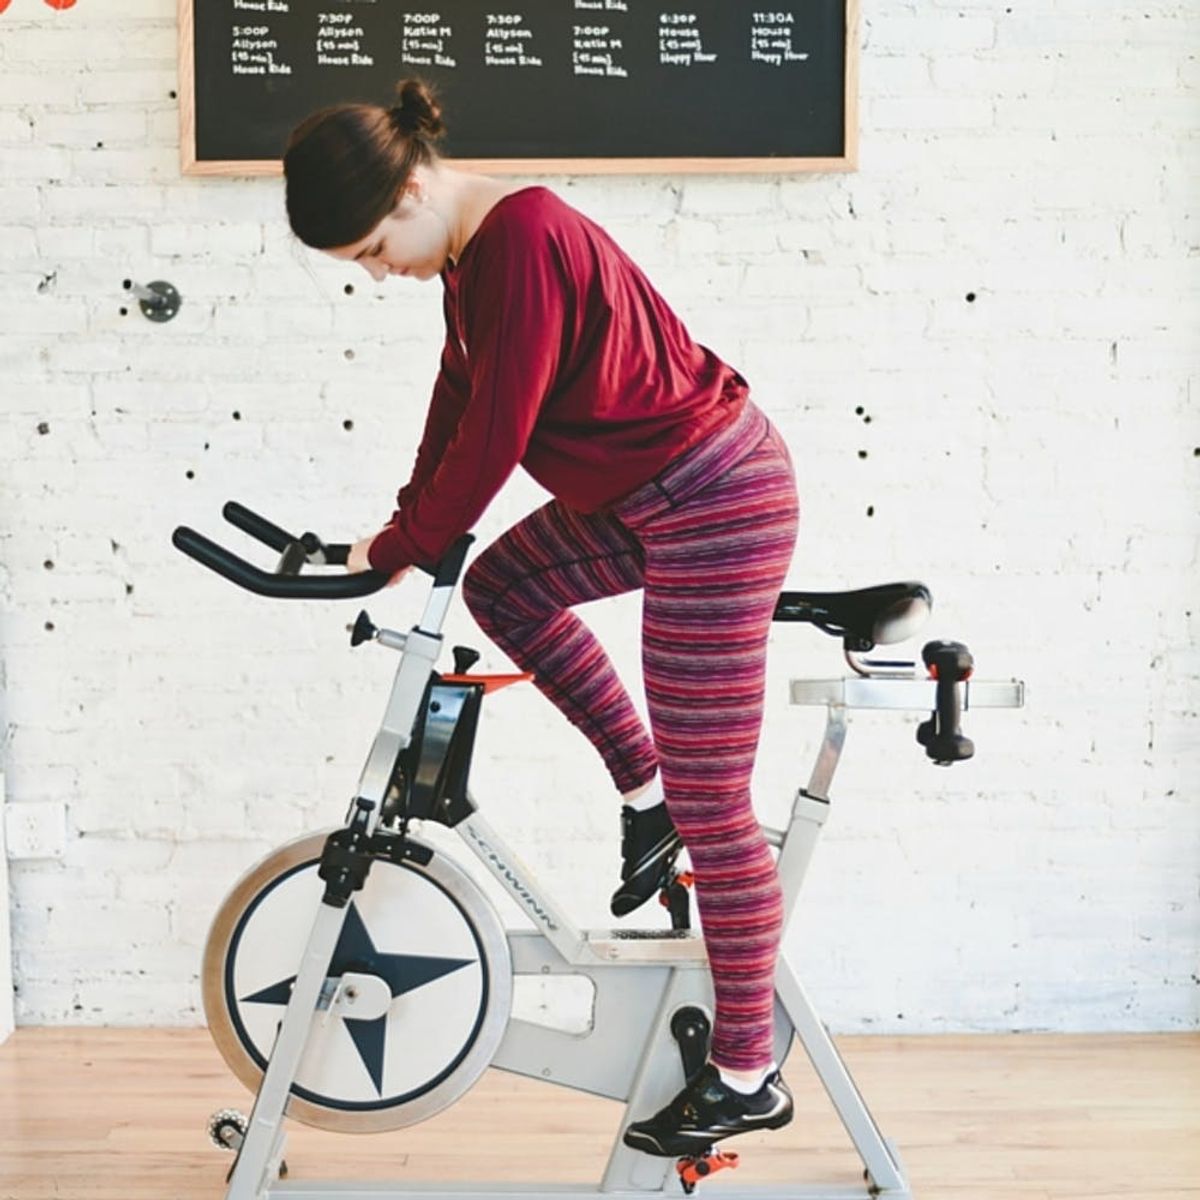 These Are All the Things You’re Doing Wrong in Spin Class